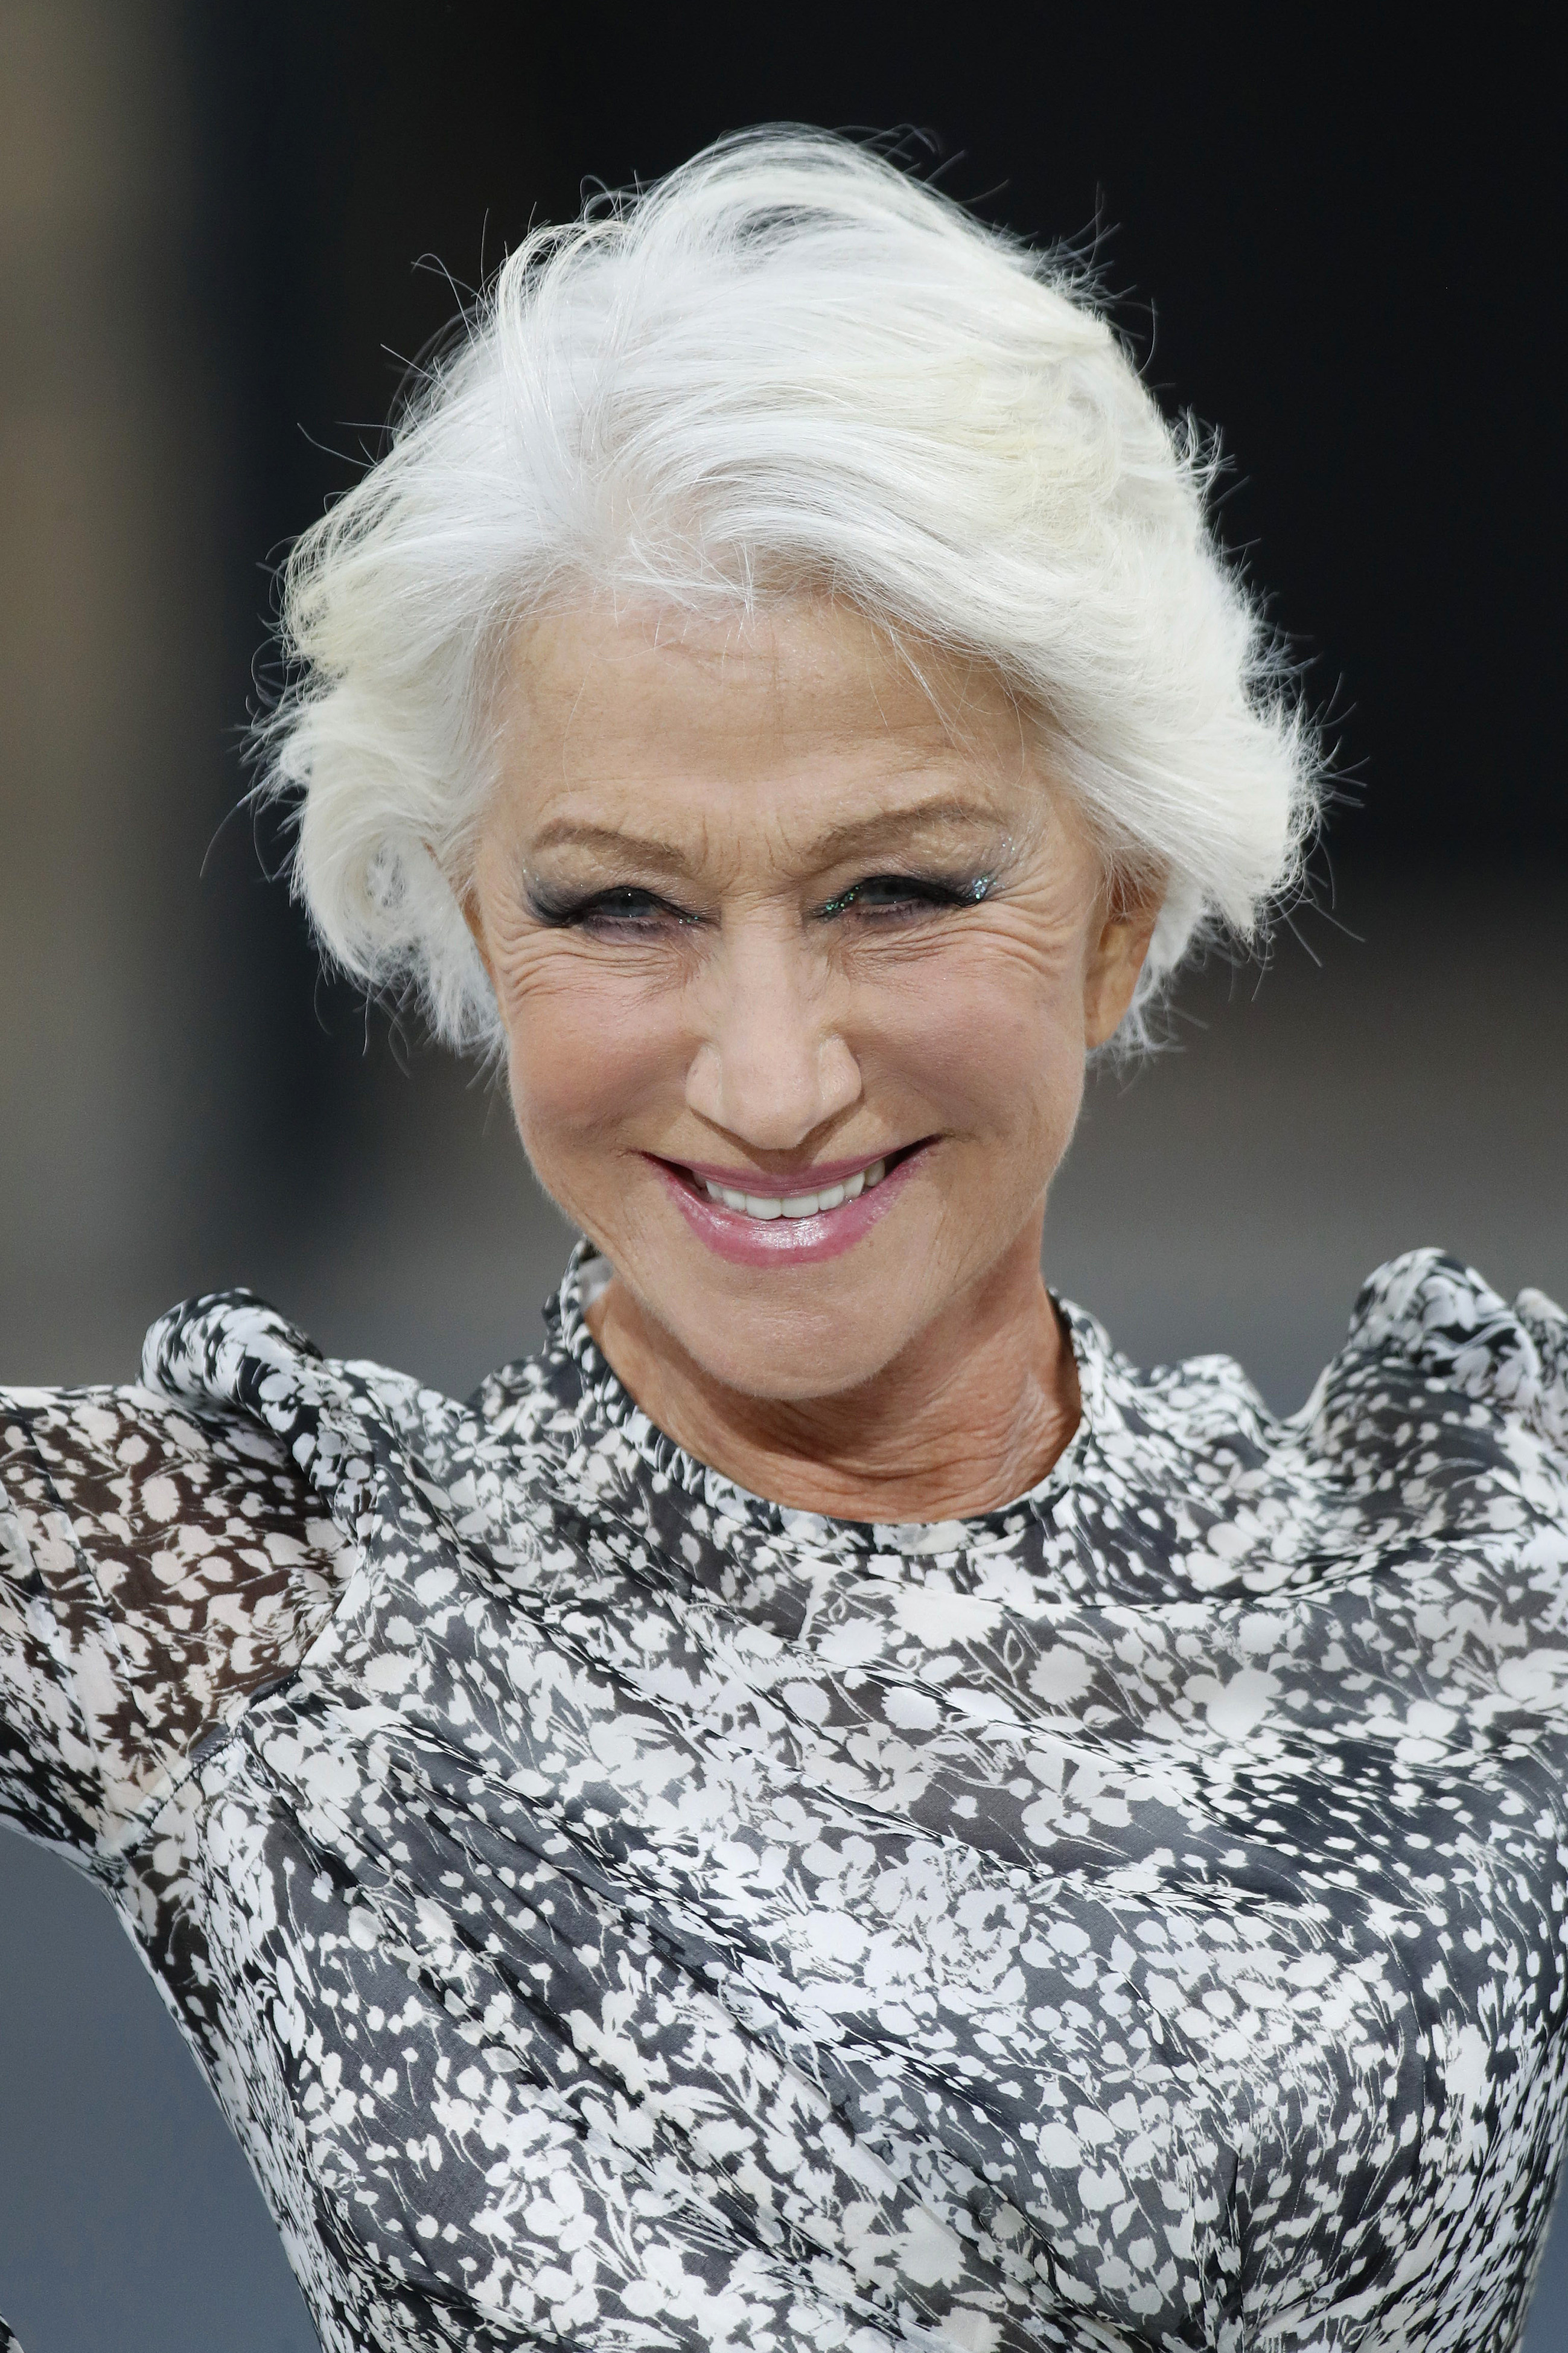 Helen Mirren at the "Le Defile L'Oreal Paris" show in Paris, France on September 28, 2019 | Source: Getty Images